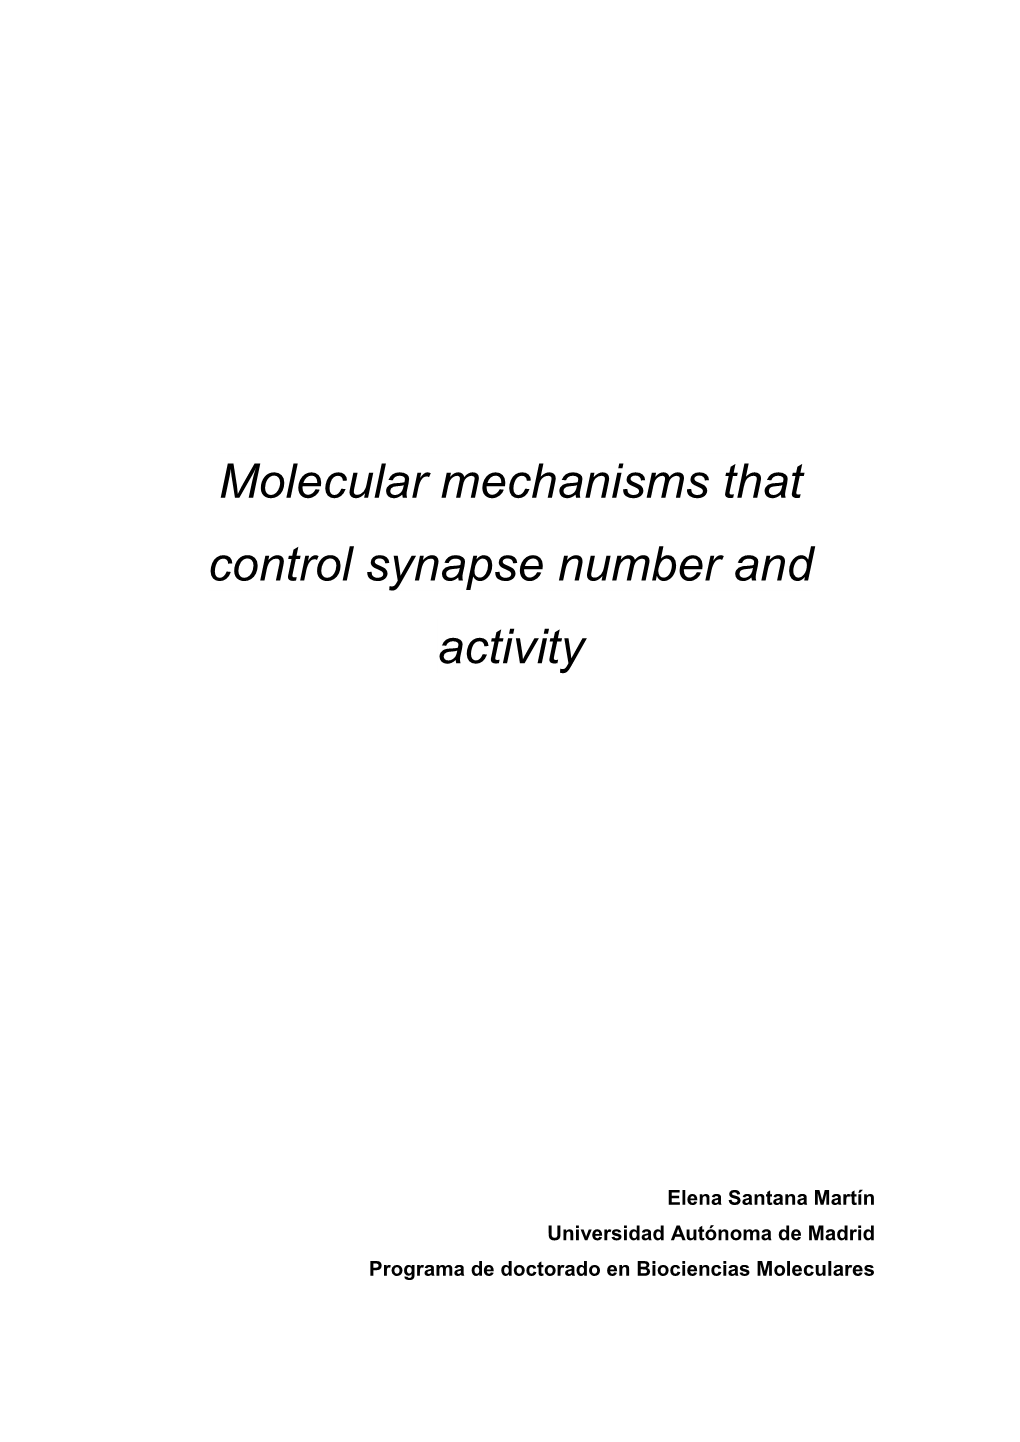 Molecular Mechanisms That Control Synapse Number and Activity